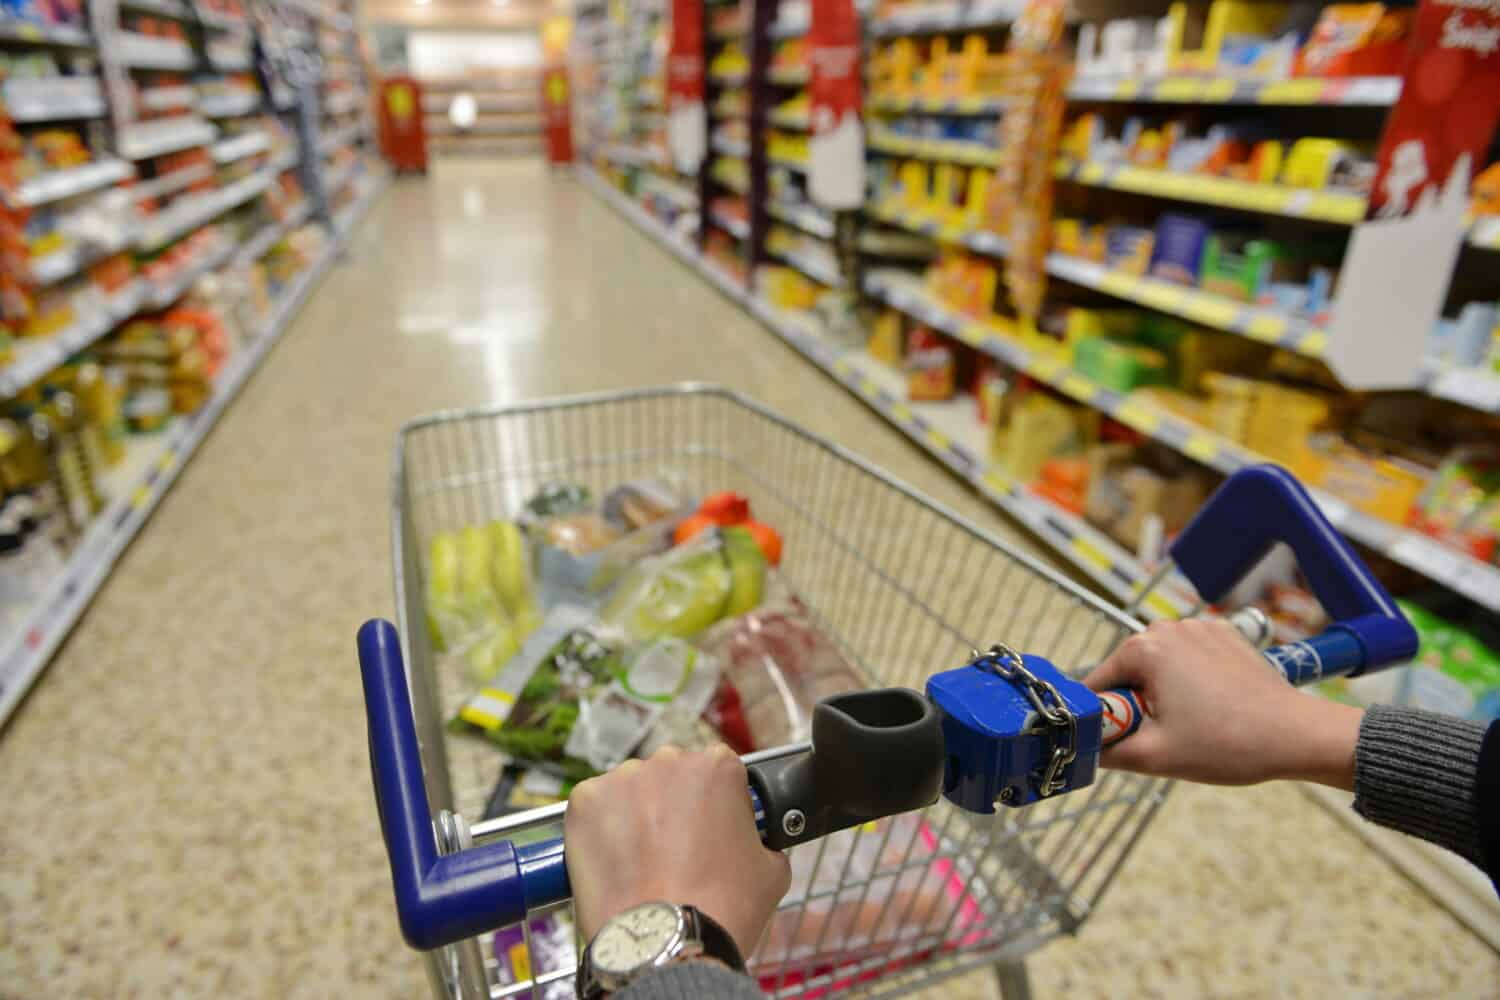 Shopper Pushes a Cart with Grocery Products in Supermarket Aisle - Image Has a Shallow Depth of Field